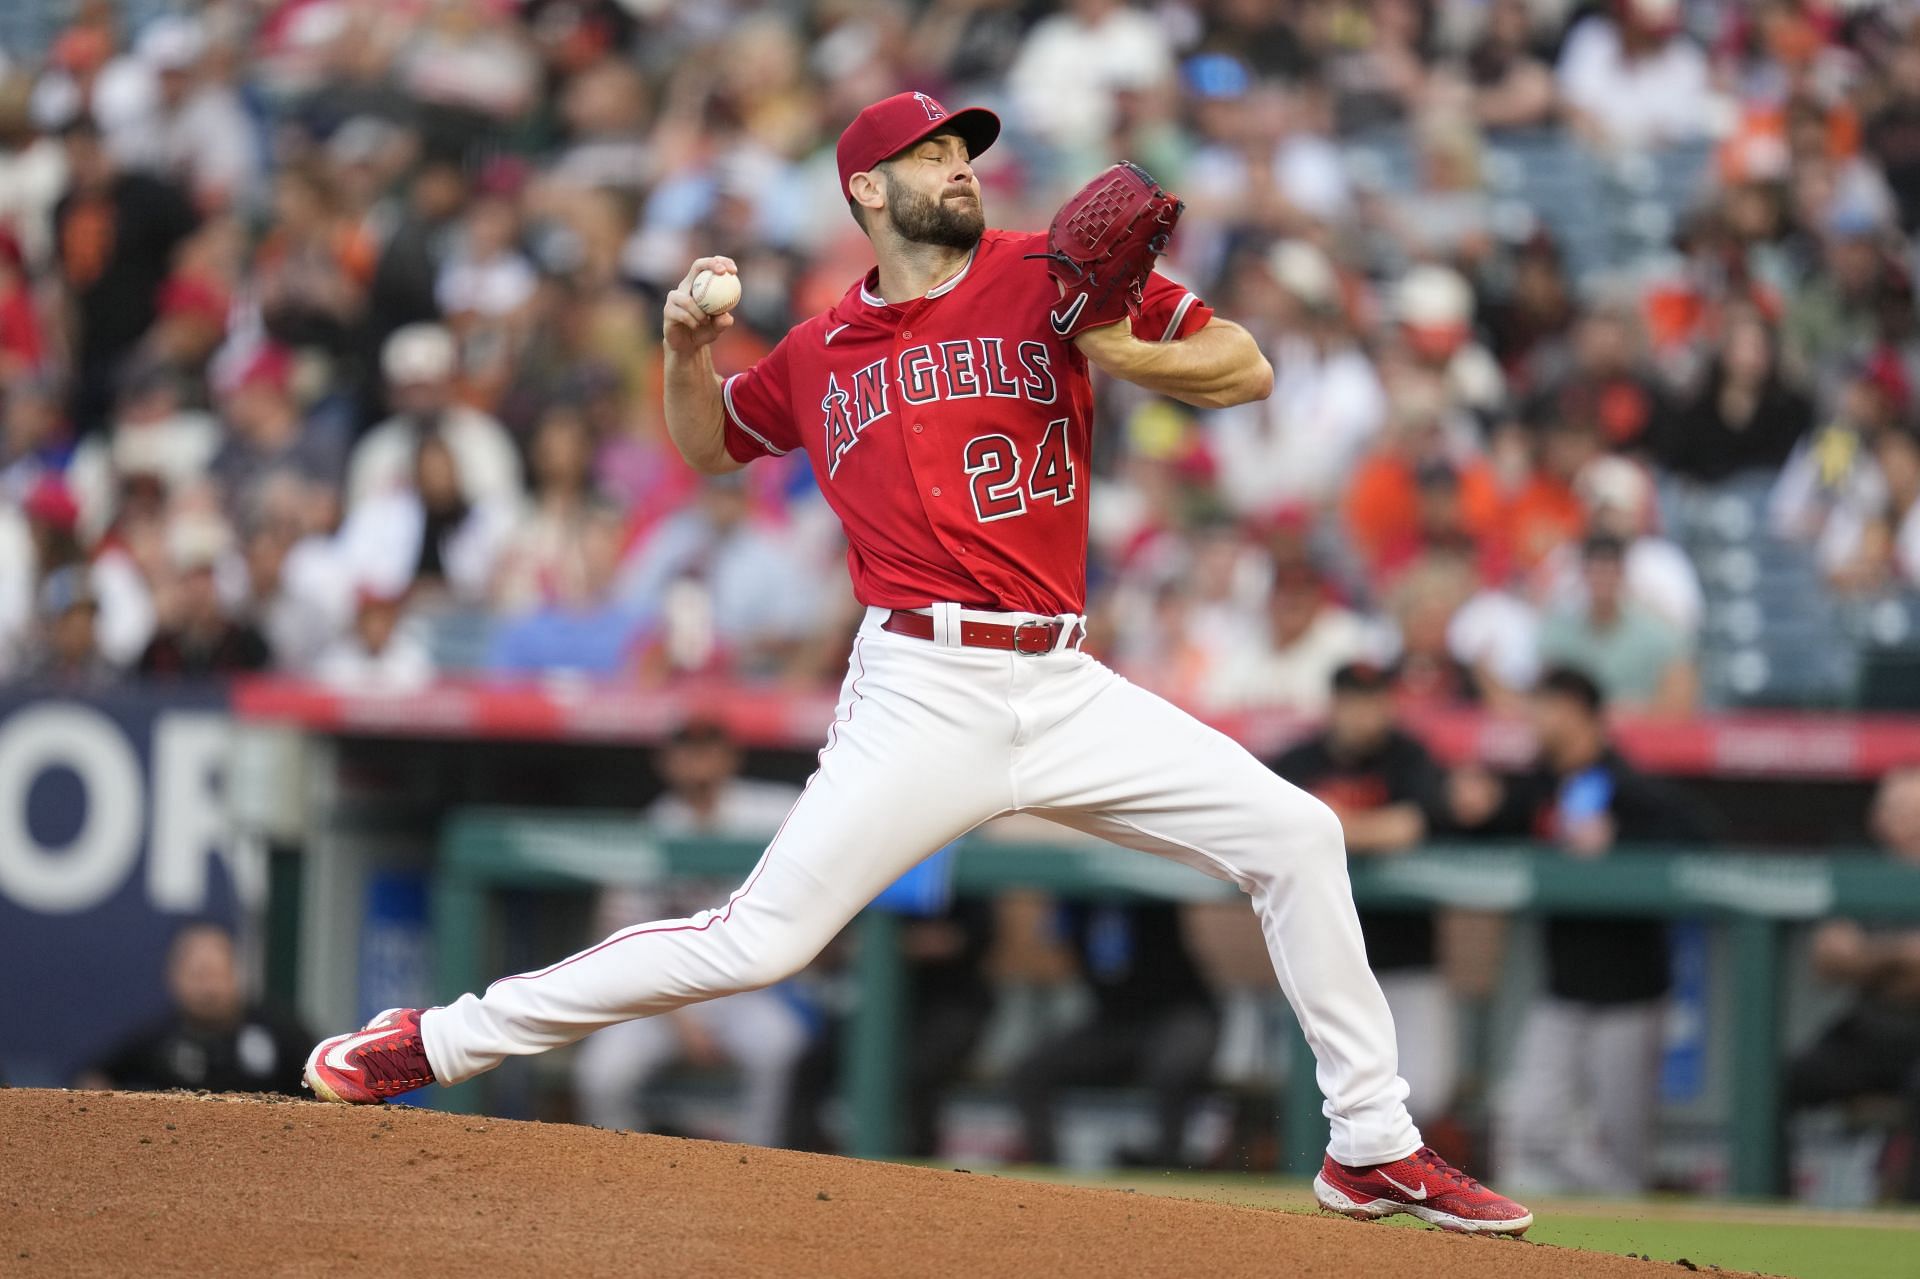 Angels' Lucas Giolito allows 9 runs in blowout loss to the Braves